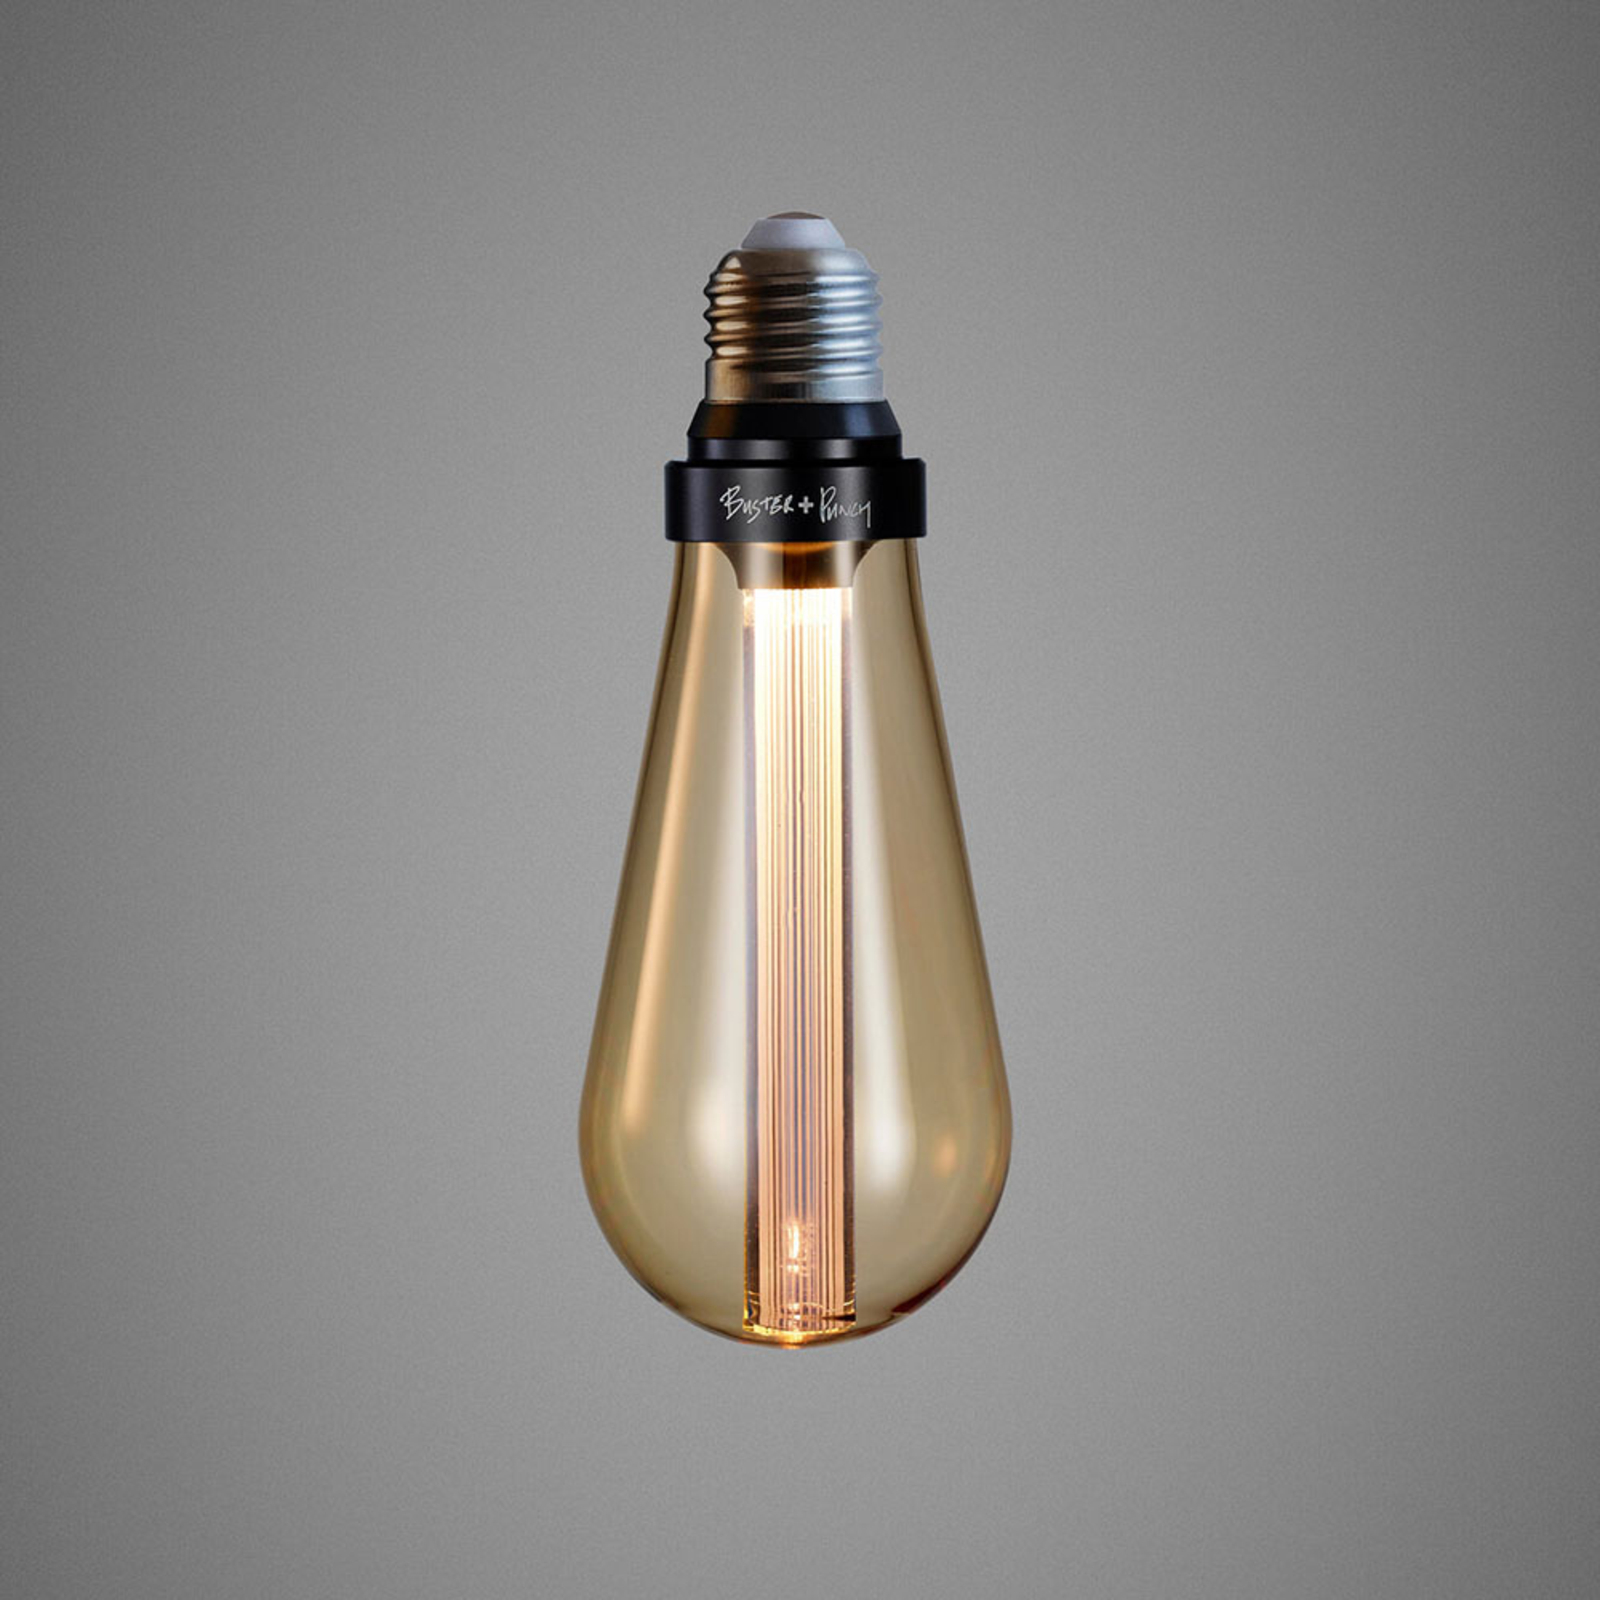 Buster + Punch LED-Lampe E27 2W dimmbar gold